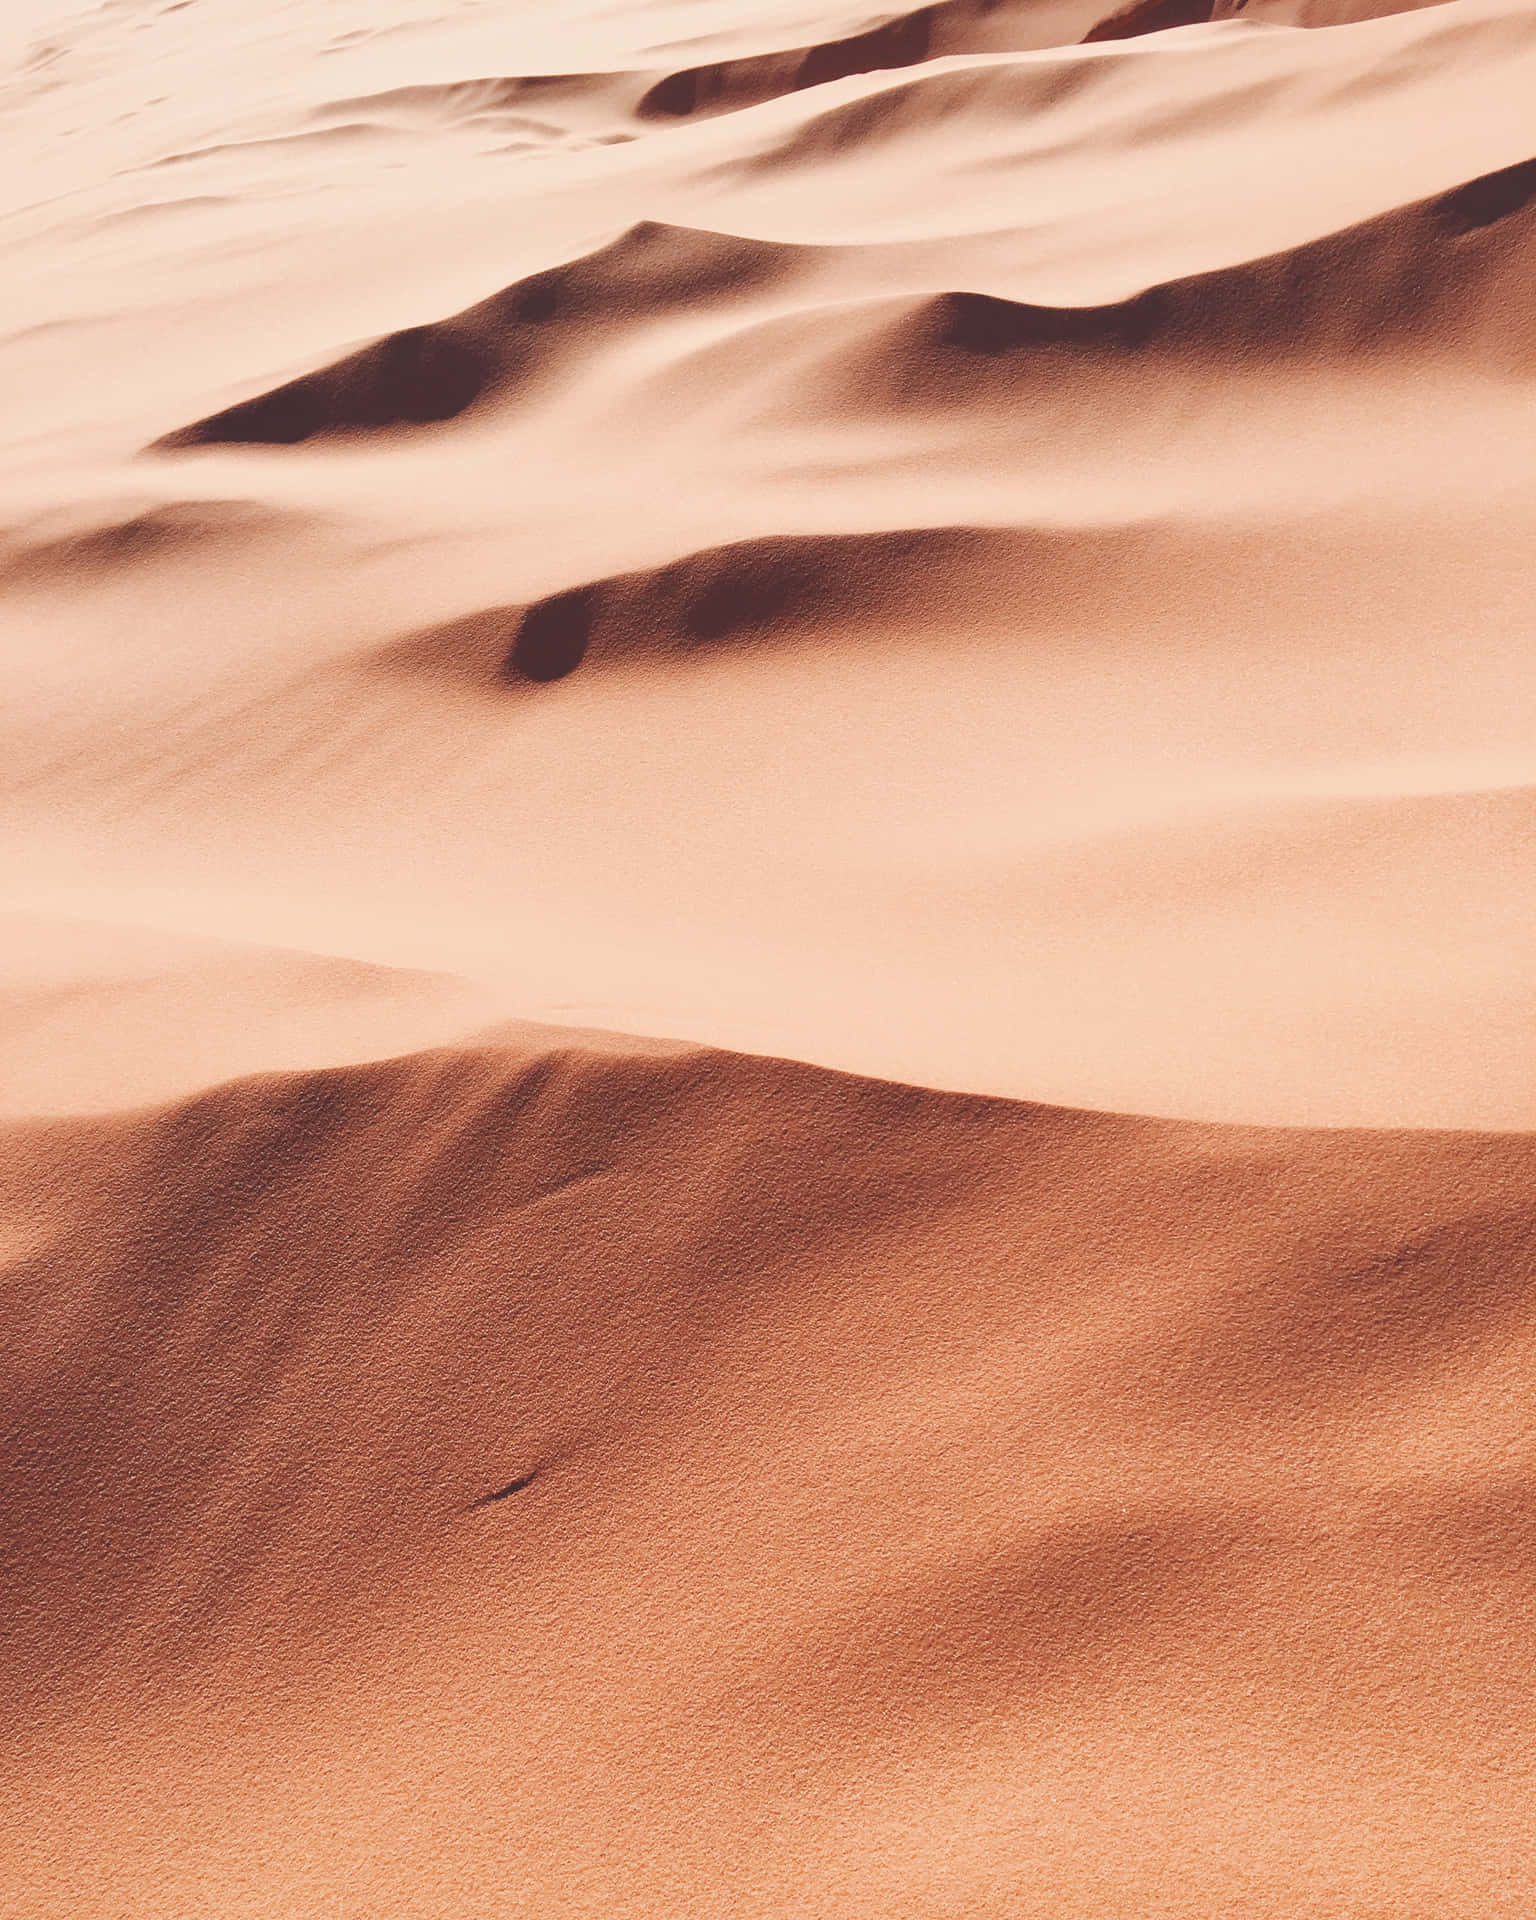 A Desert With Sand Dunes And Sand